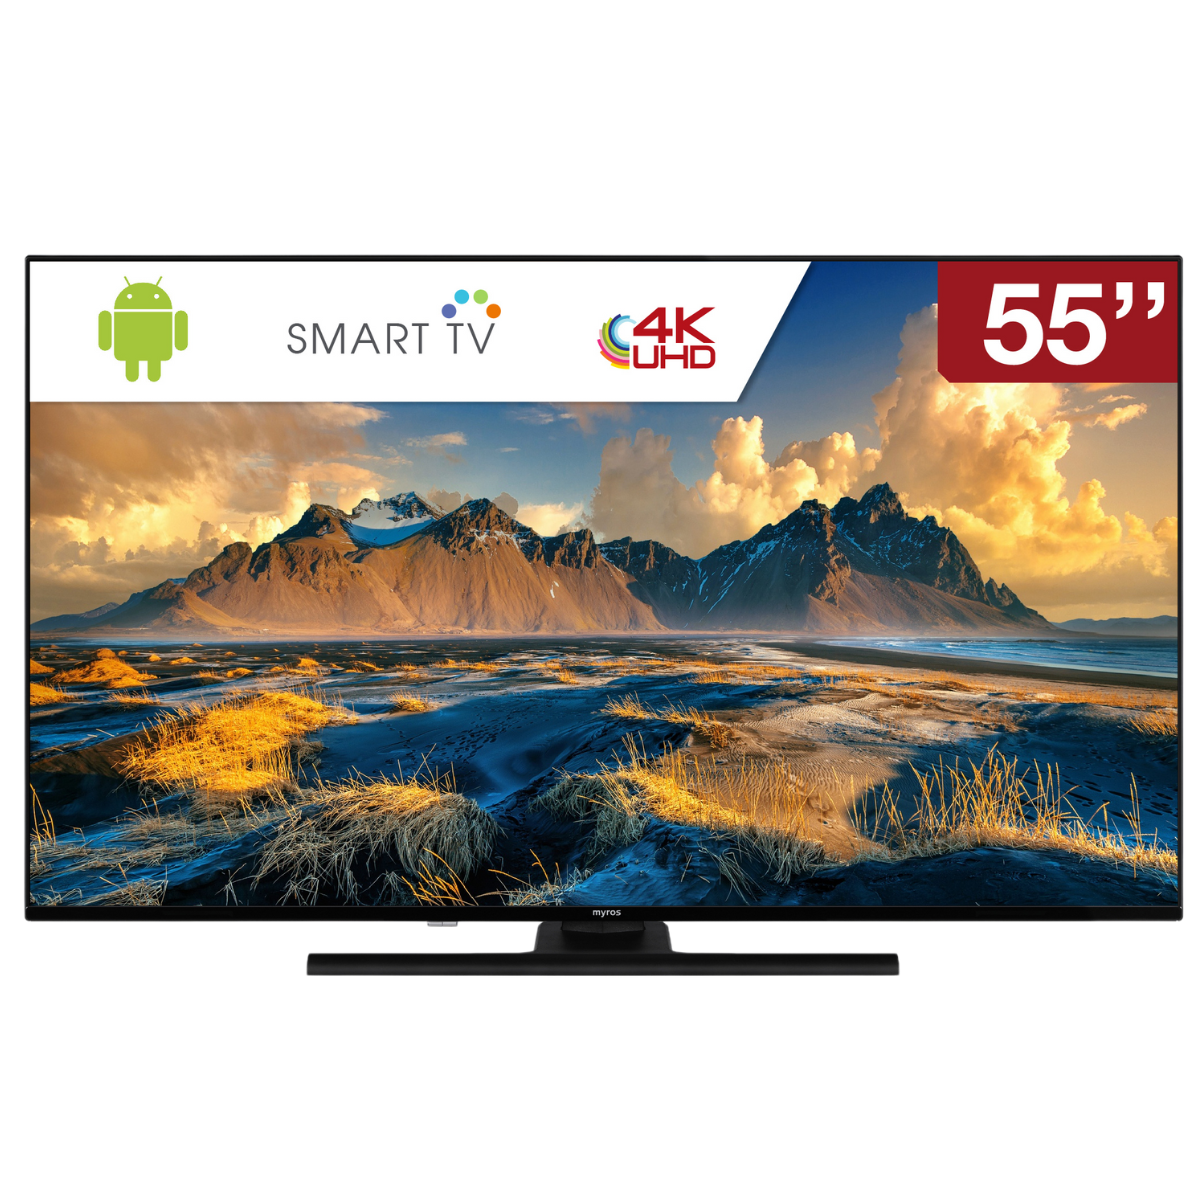 Buy Cenit 43 inch 1GB Black Android Smart HD LED TV, CG43S Online